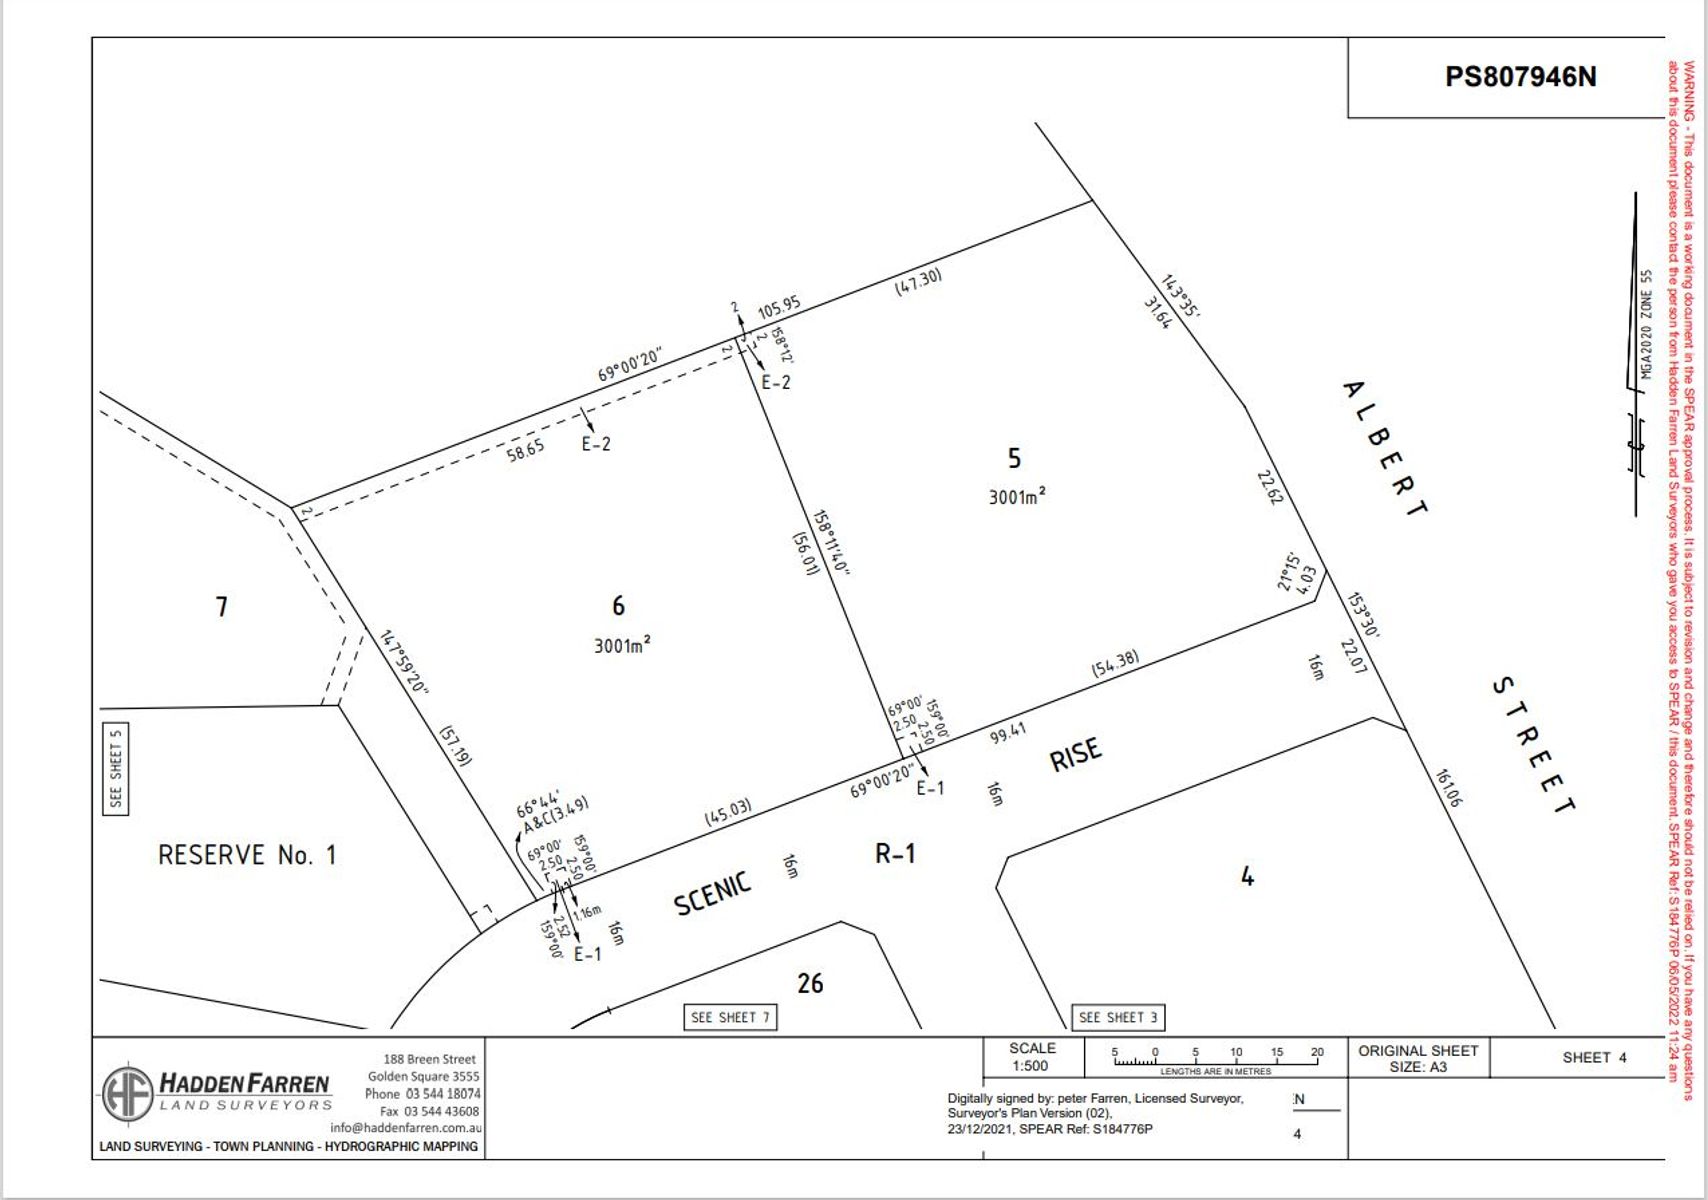 Page 4 Plan of subdivision